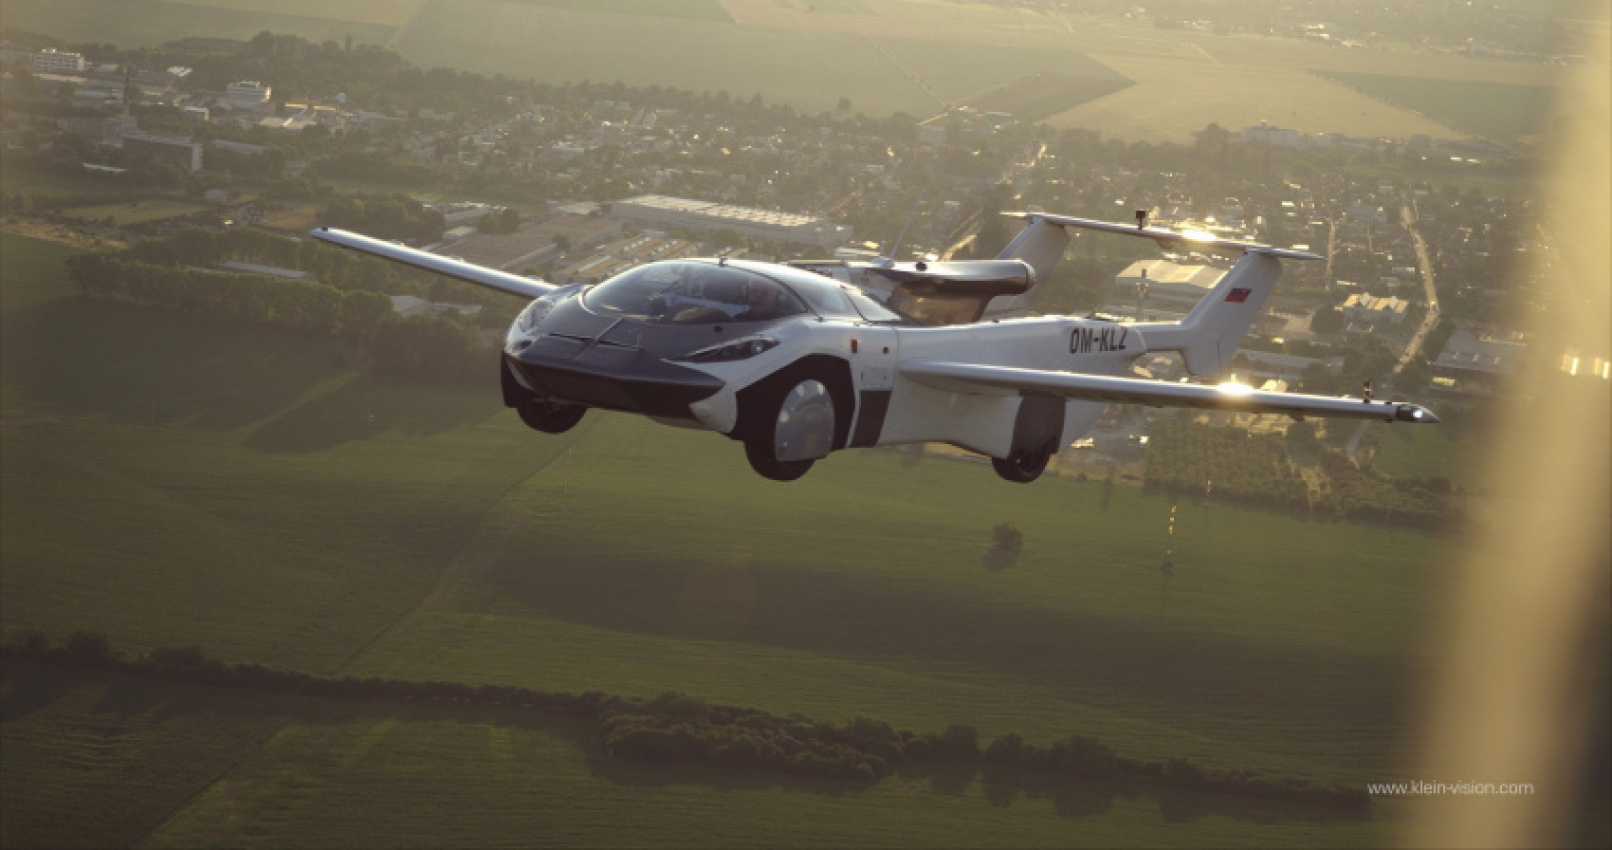 autos, bmw, cars, news, aircar, flying cars, klein vision, video, bmw-powered aircar just proved that production flying cars might be closer to reality than ever before